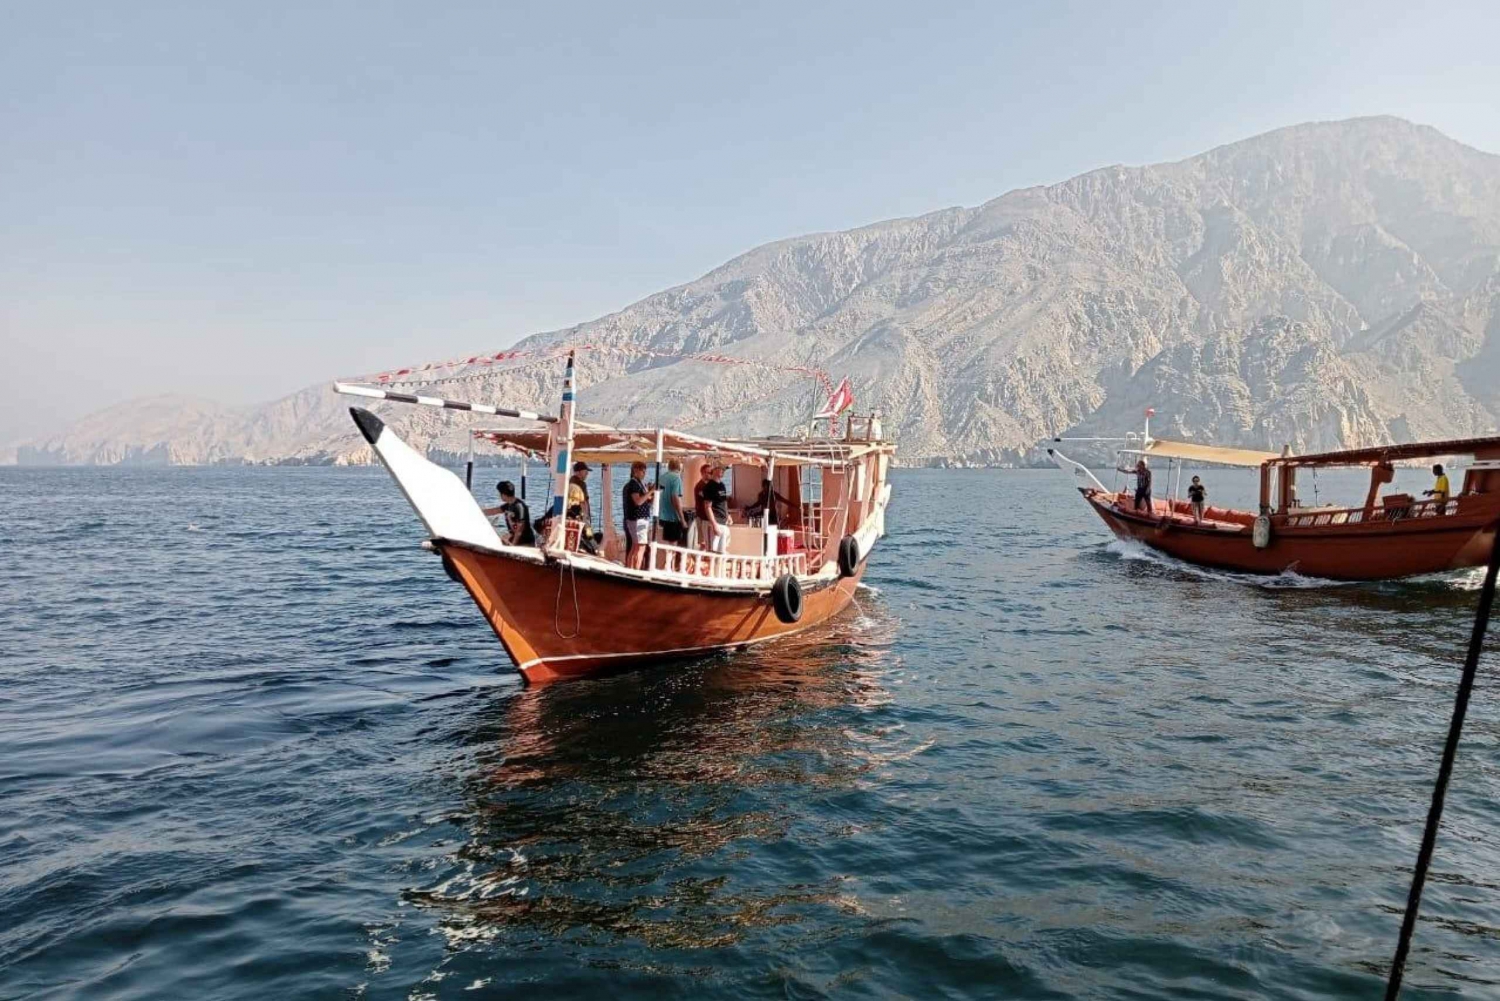 Khasab: Half-Day Dhow Cruise, Dolphin Watching, & Snorkeling